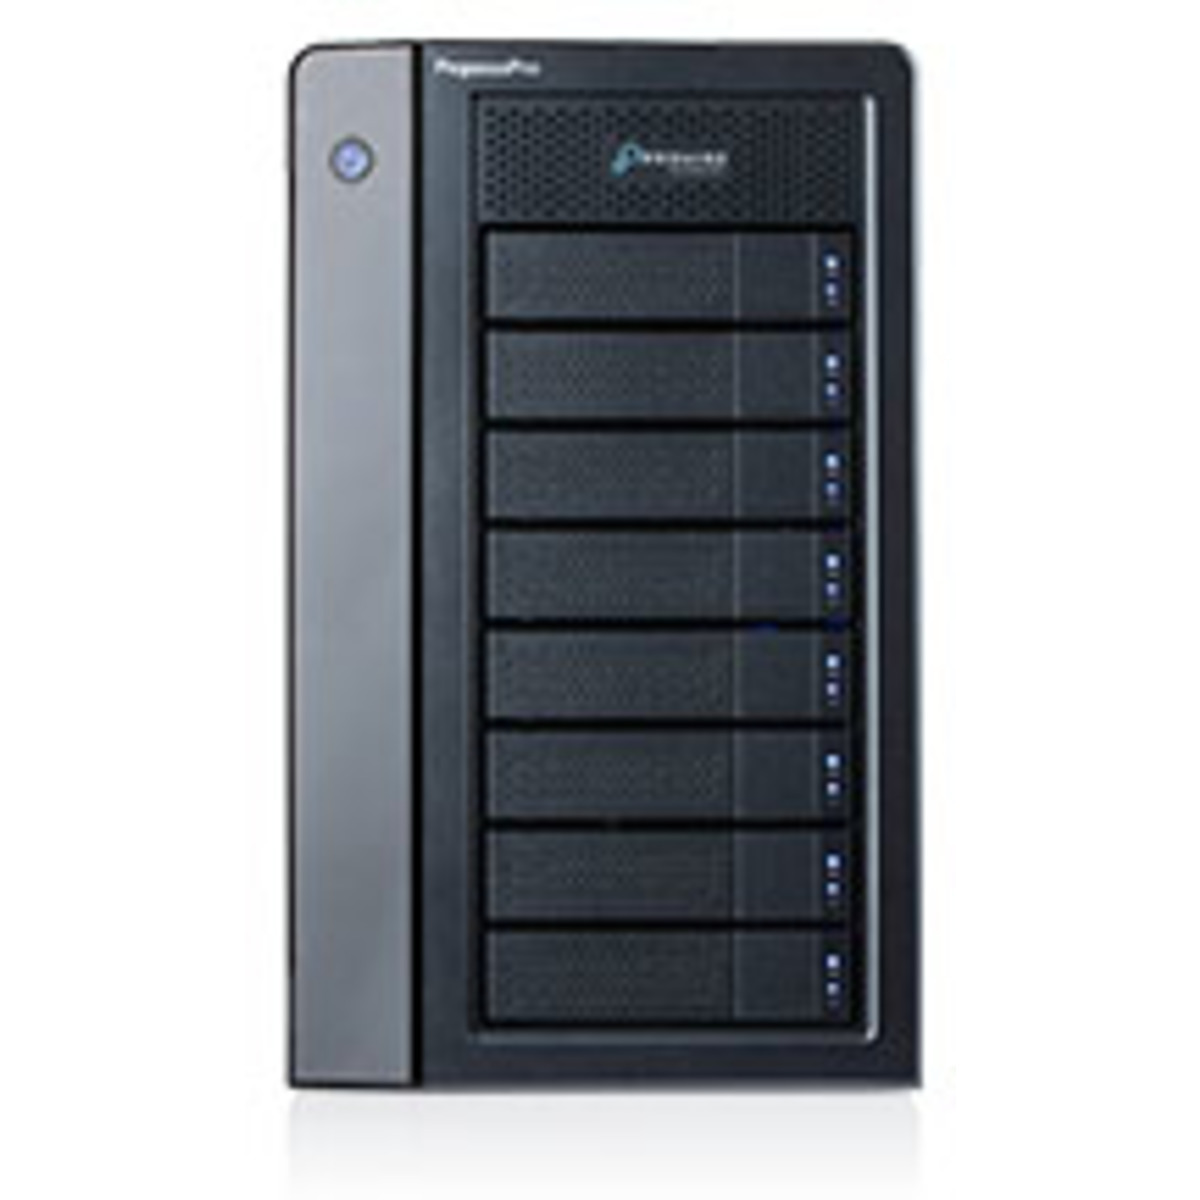 buy $9411 Promise Technology PegasusPro R8 128tb Desktop DAS-NAS - Combo Direct + Network Storage Device 8x16000gb Toshiba Enterprise Capacity MG08ACA16TE 3.5 7200rpm SATA 6Gb/s HDD ENTERPRISE Class Drives Installed - Burn-In Tested - nas headquarters buy network attached storage server device das new raid-5 free shipping usa PegasusPro R8